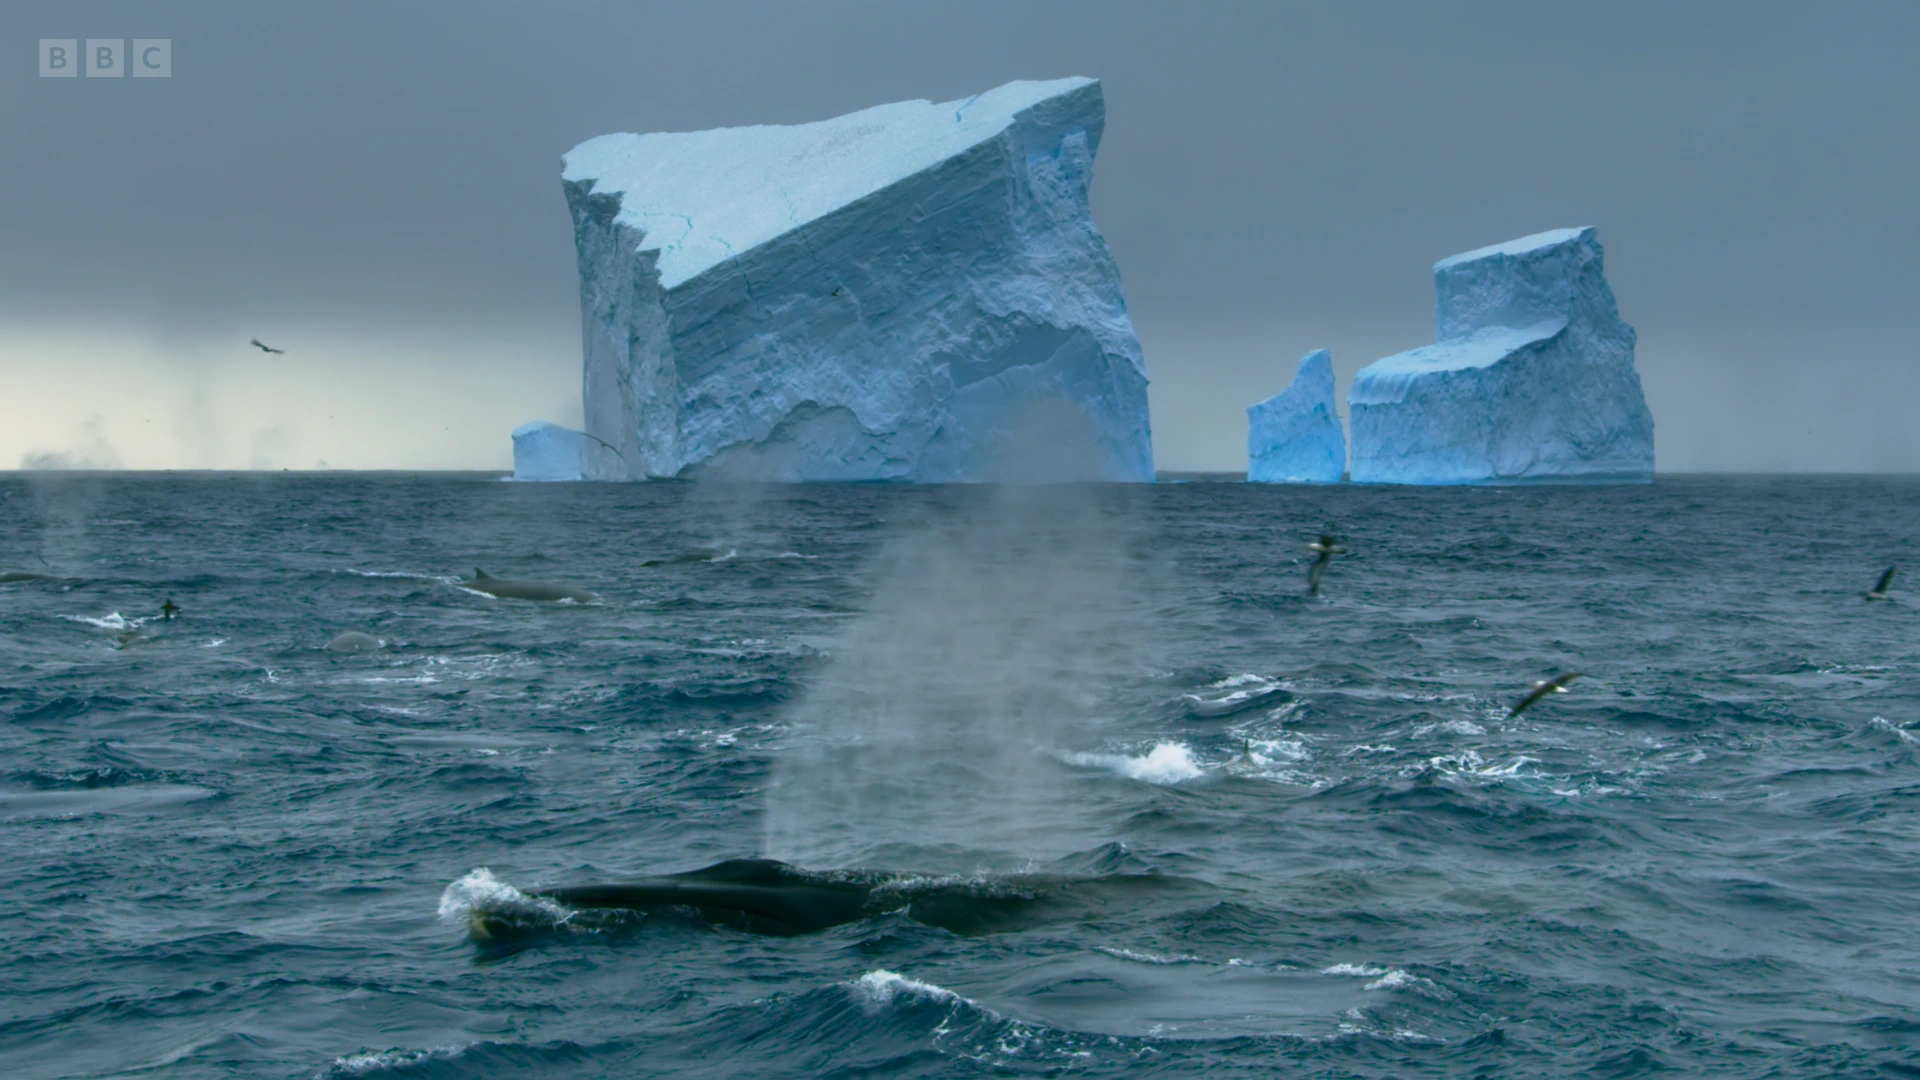 Southern fin whale (Balaenoptera physalus quoyi) as shown in Seven Worlds, One Planet - Antarctica